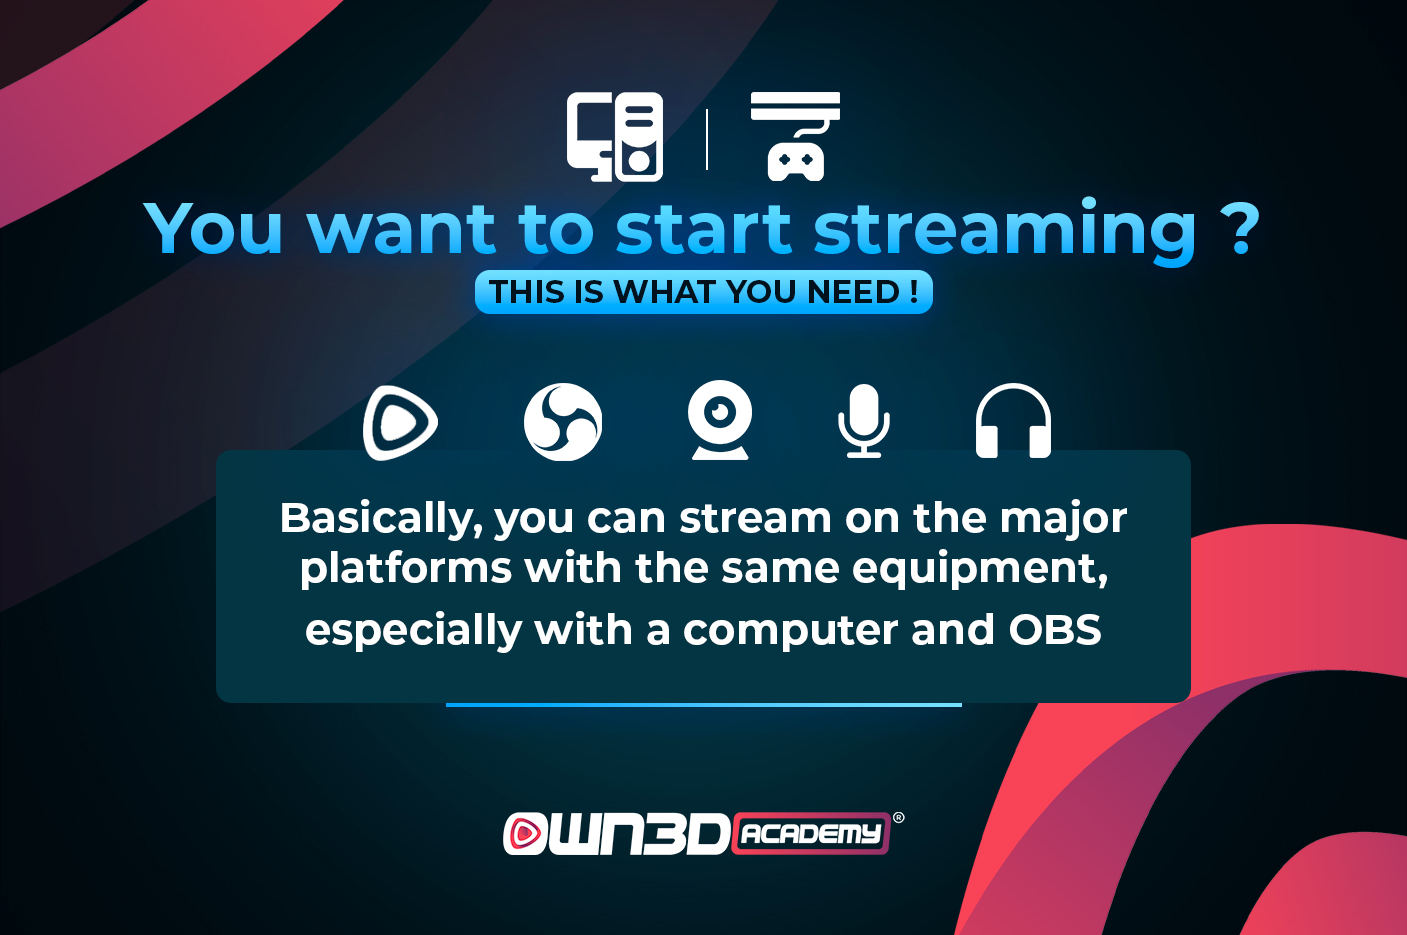 EN_General_What-do-you-need-to-stream_platforms.jpg